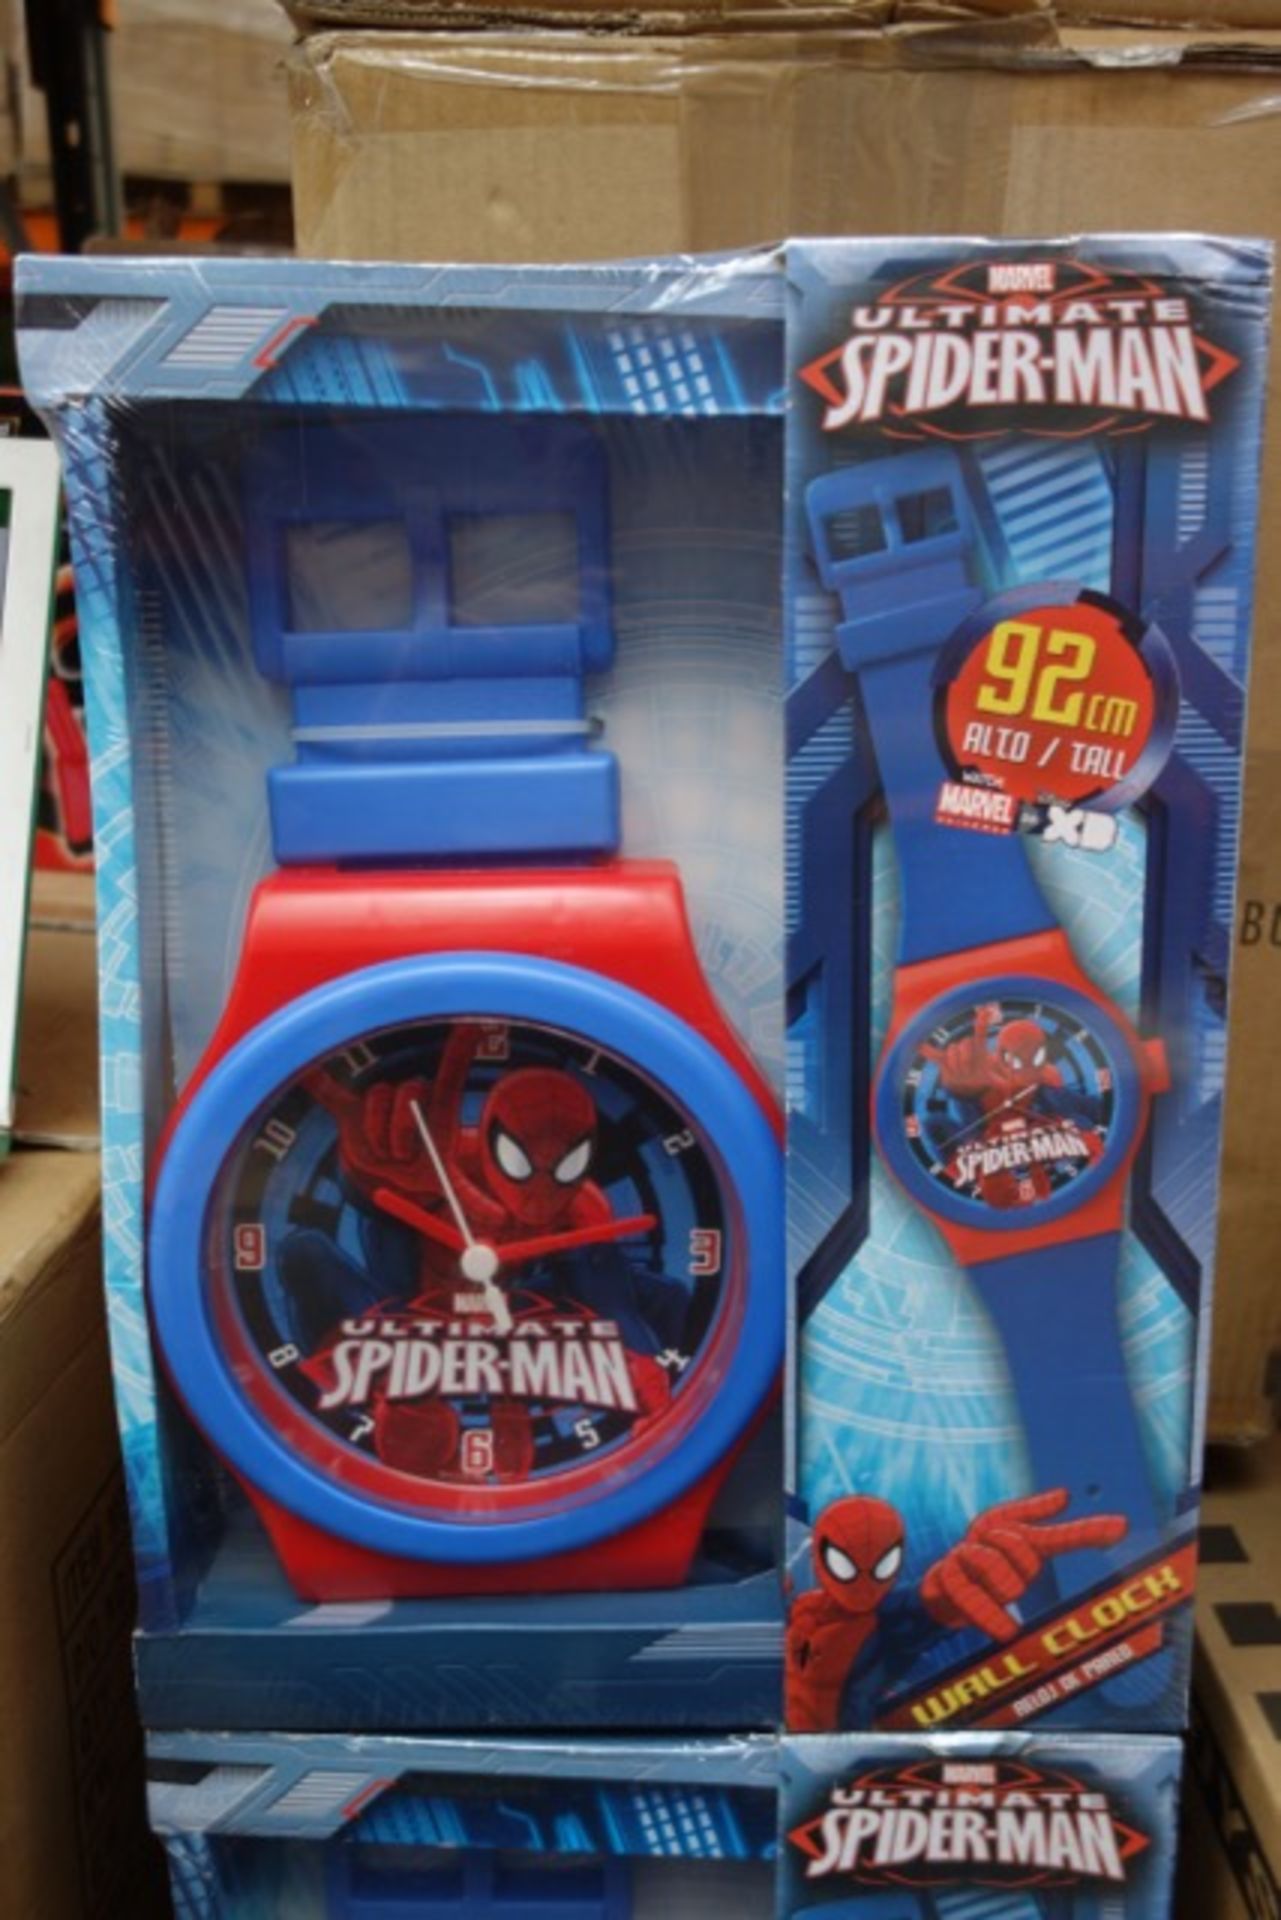 PALLET to contain 42 x Marvel Ultimate Spider-Man 92cm Tall Watch Wall Clocks. RRP £19.99 each,